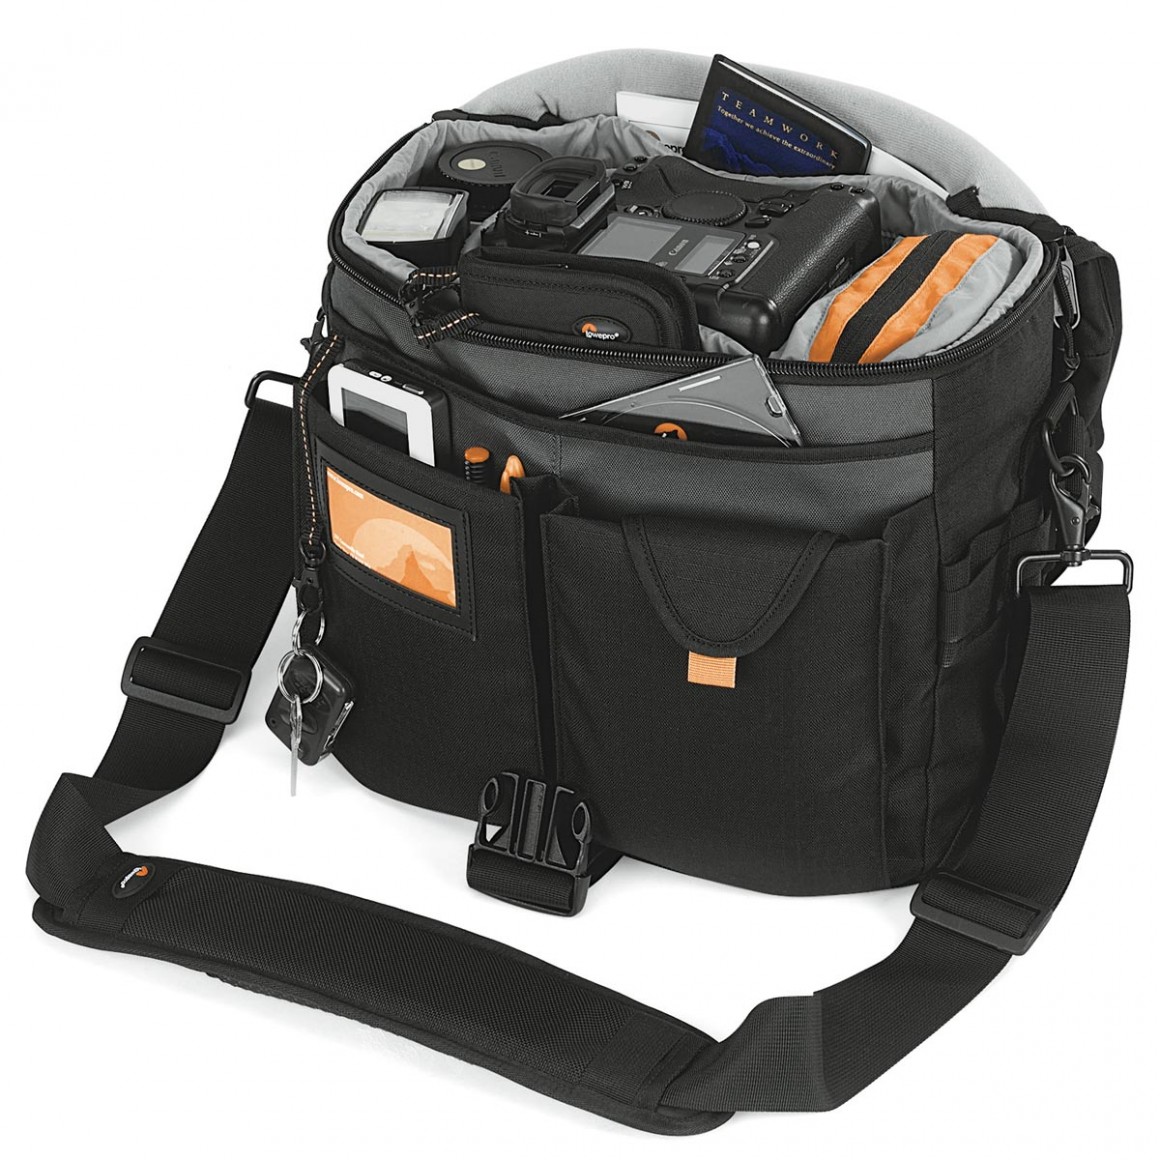 Lowepro Stealth Reporter D400 AW Review – Four Years Later